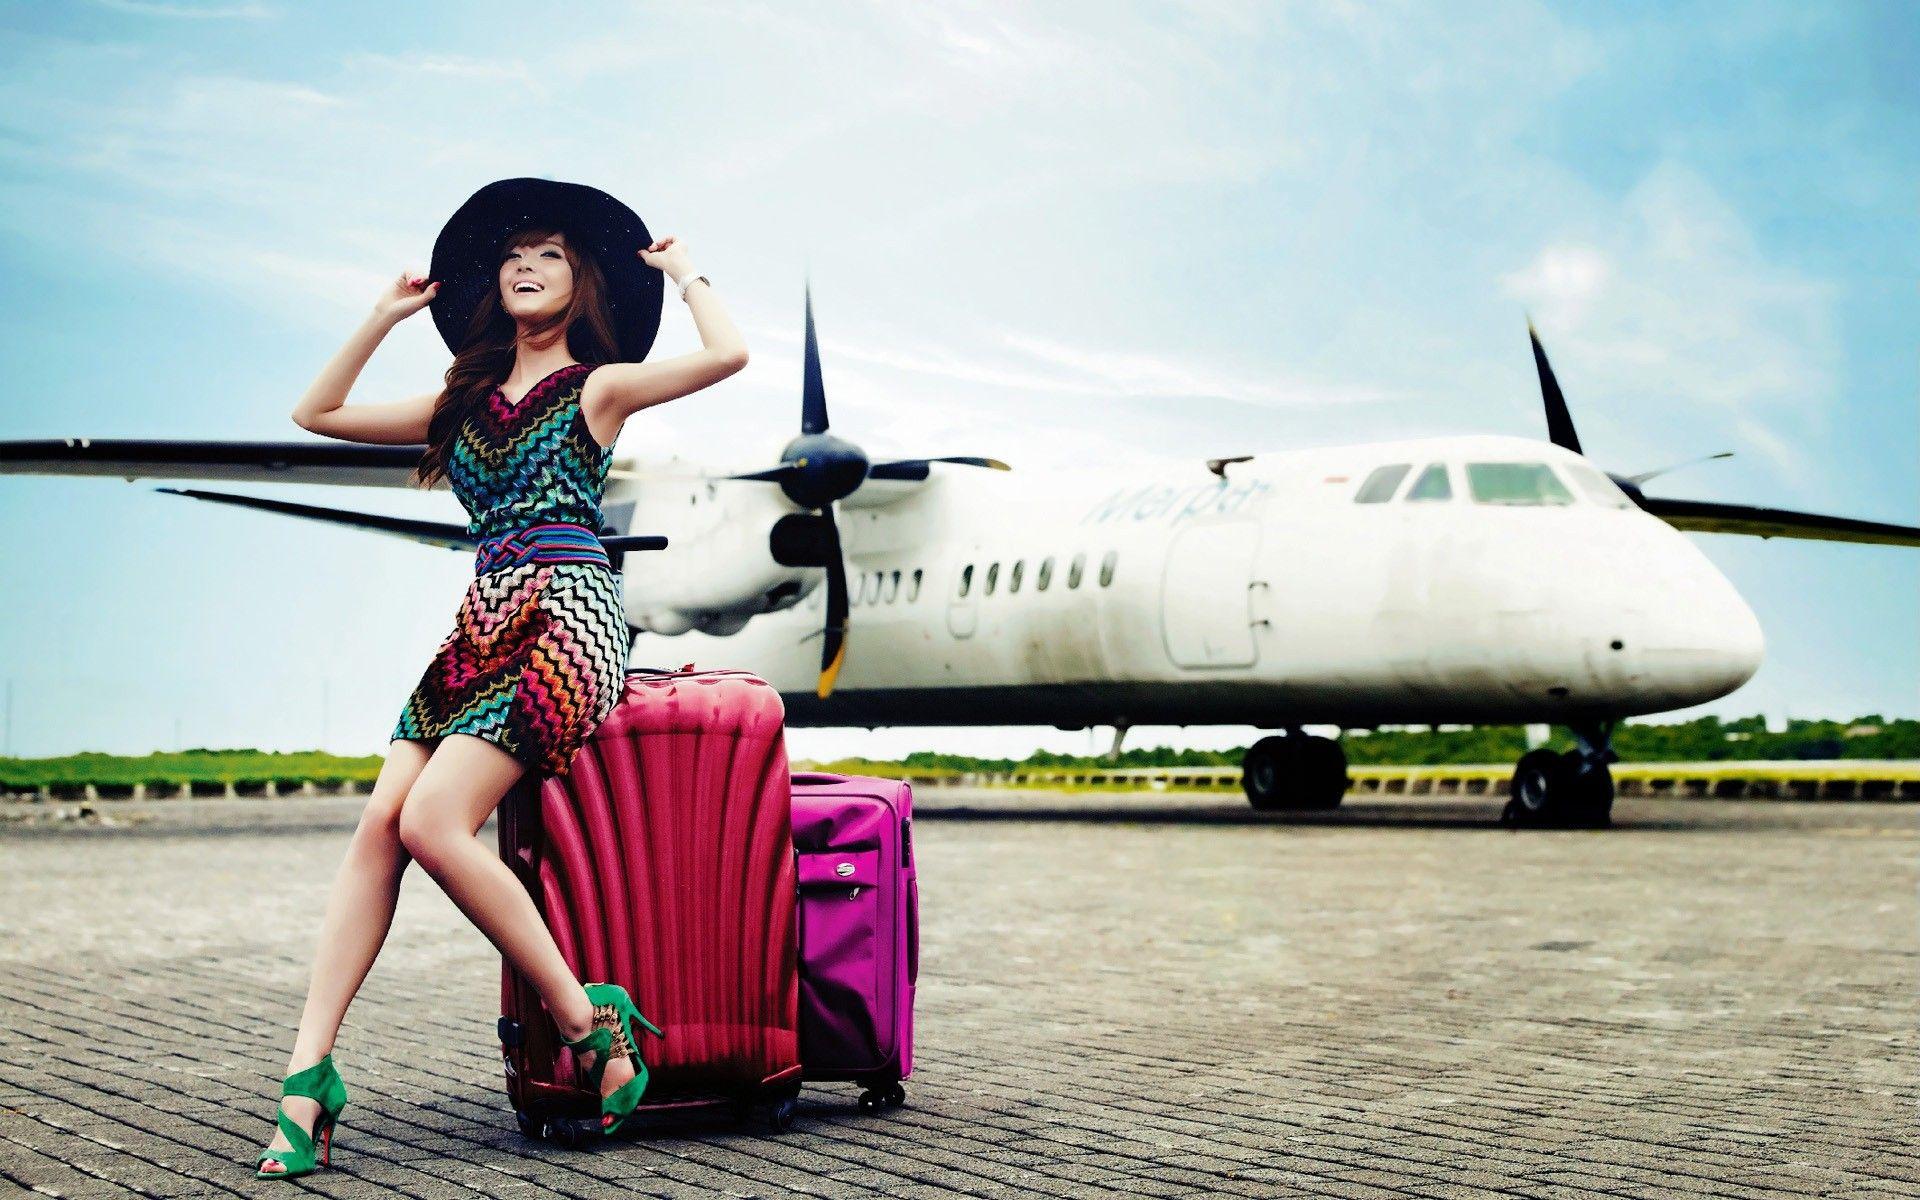 Girl traveller wallpaper and image, picture, photo